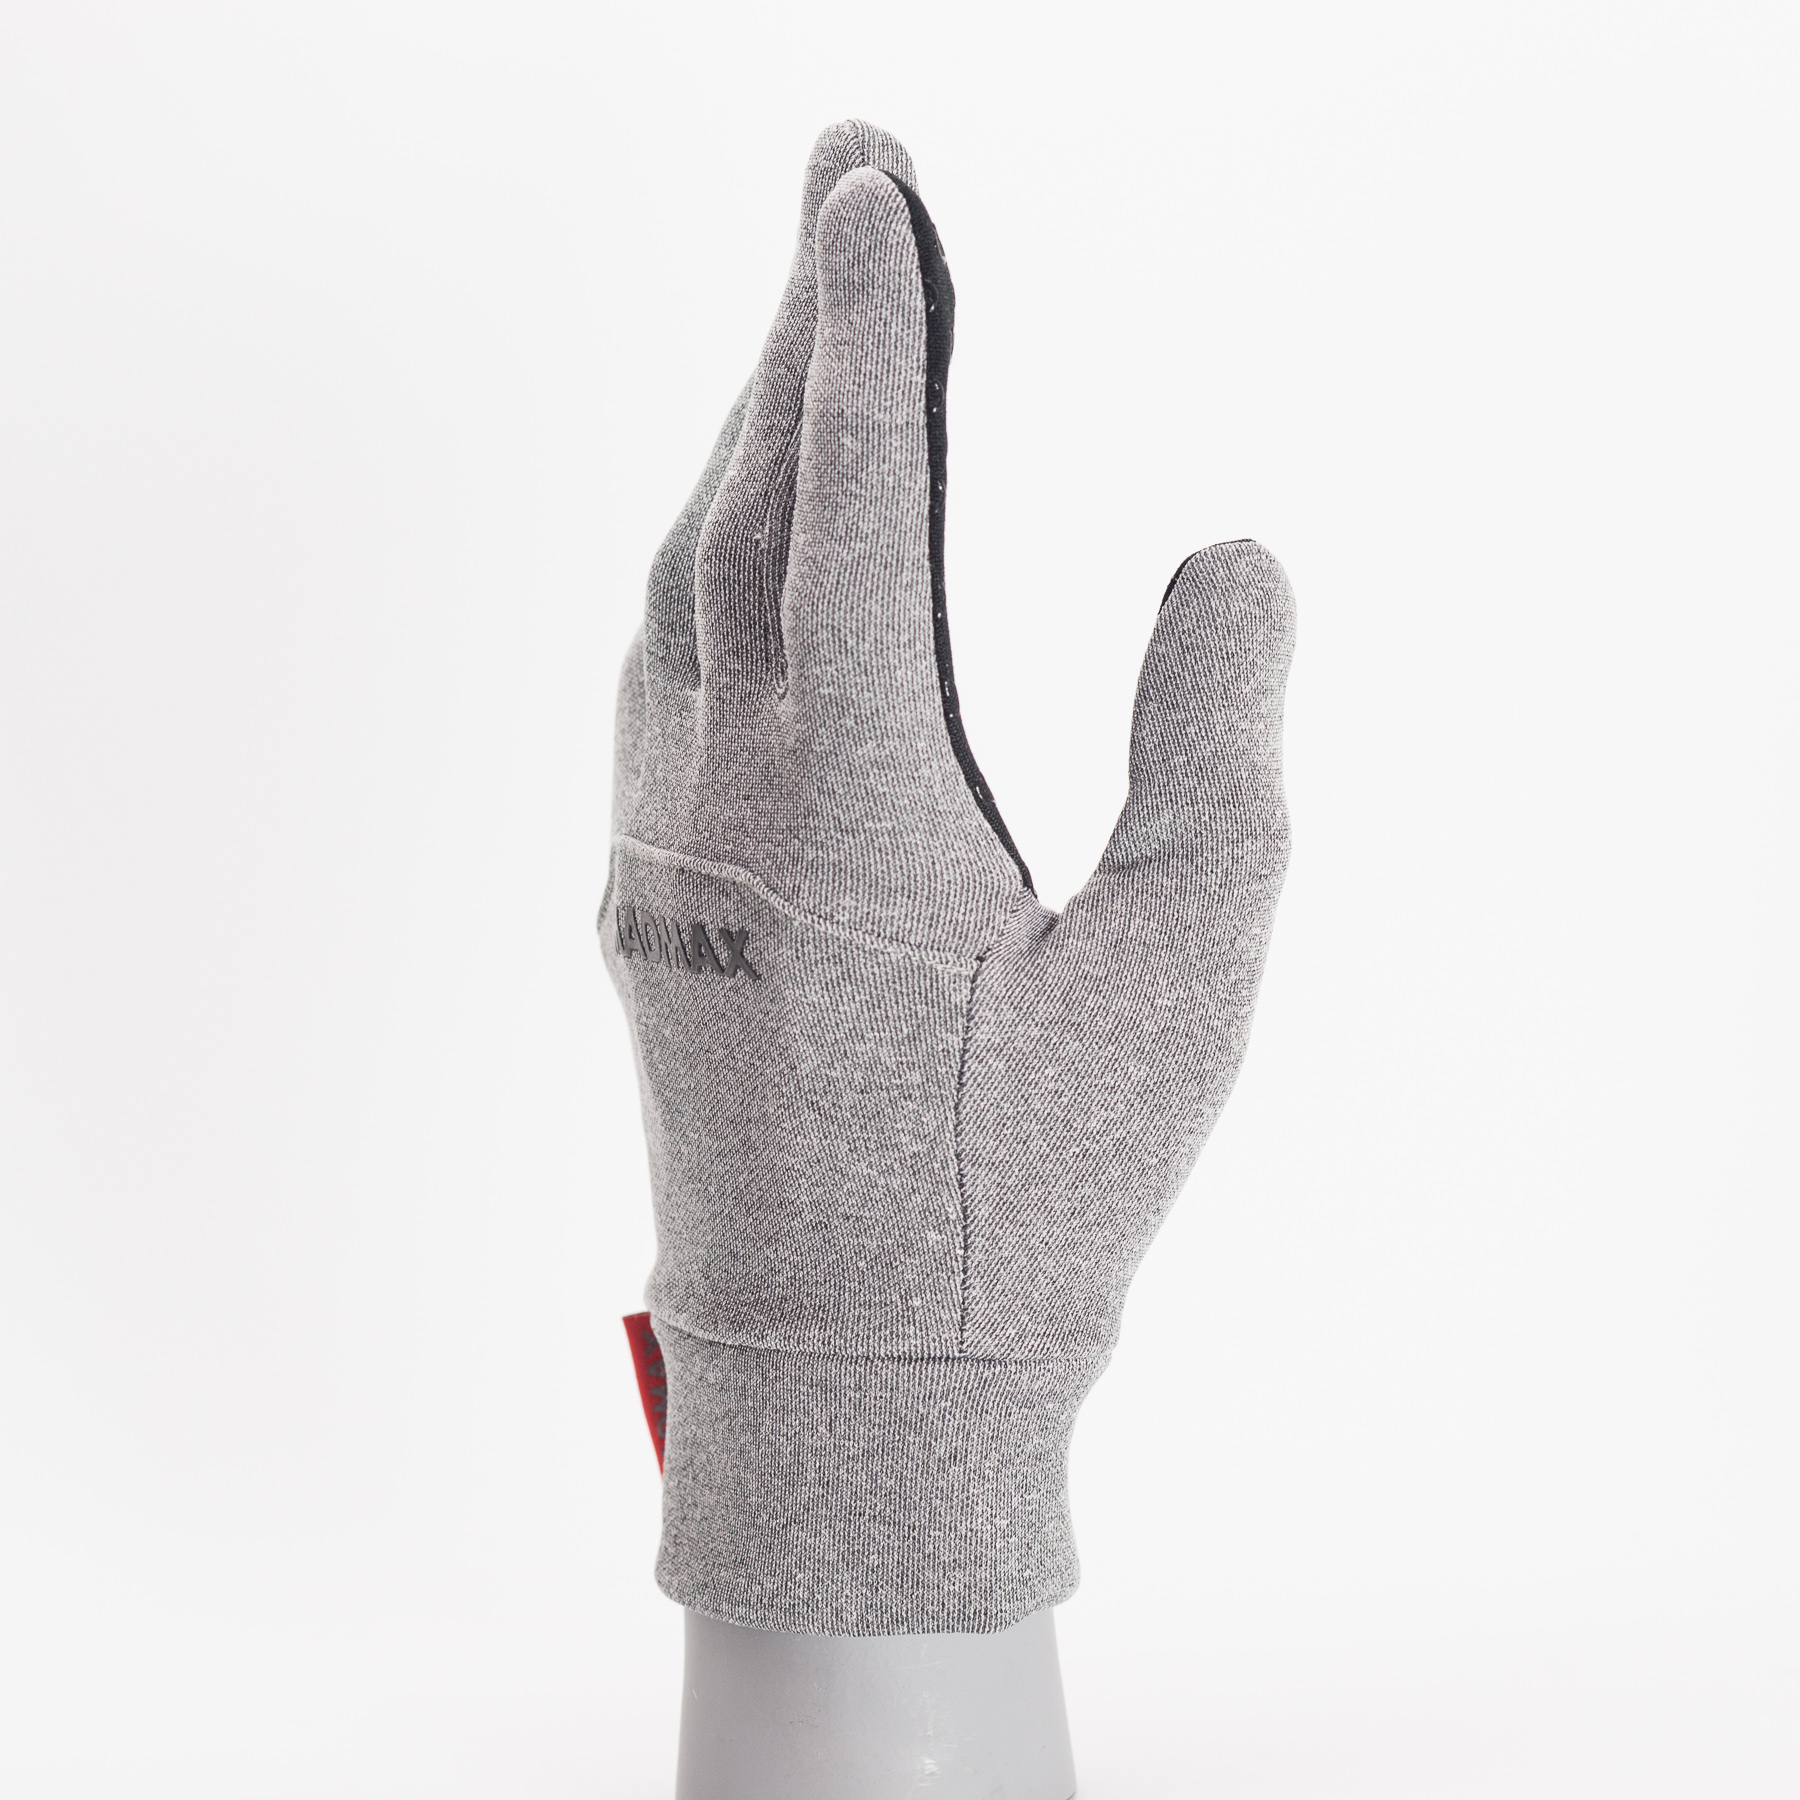 MADMAX Outdoor Gloves